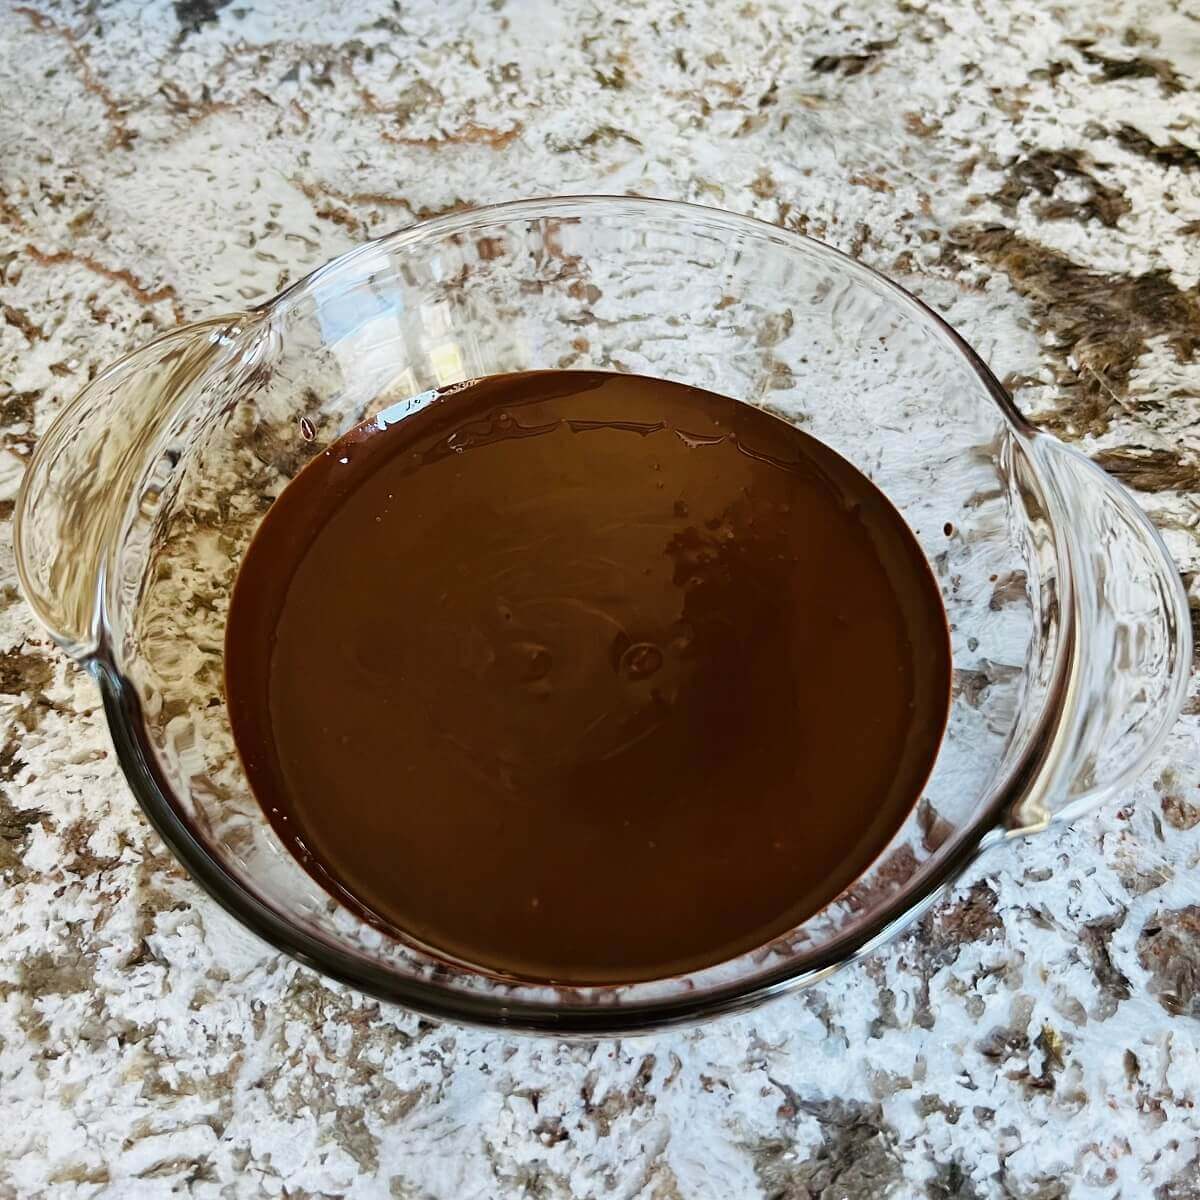 Melted dark chocolate and peanut butter in a glass bowl.